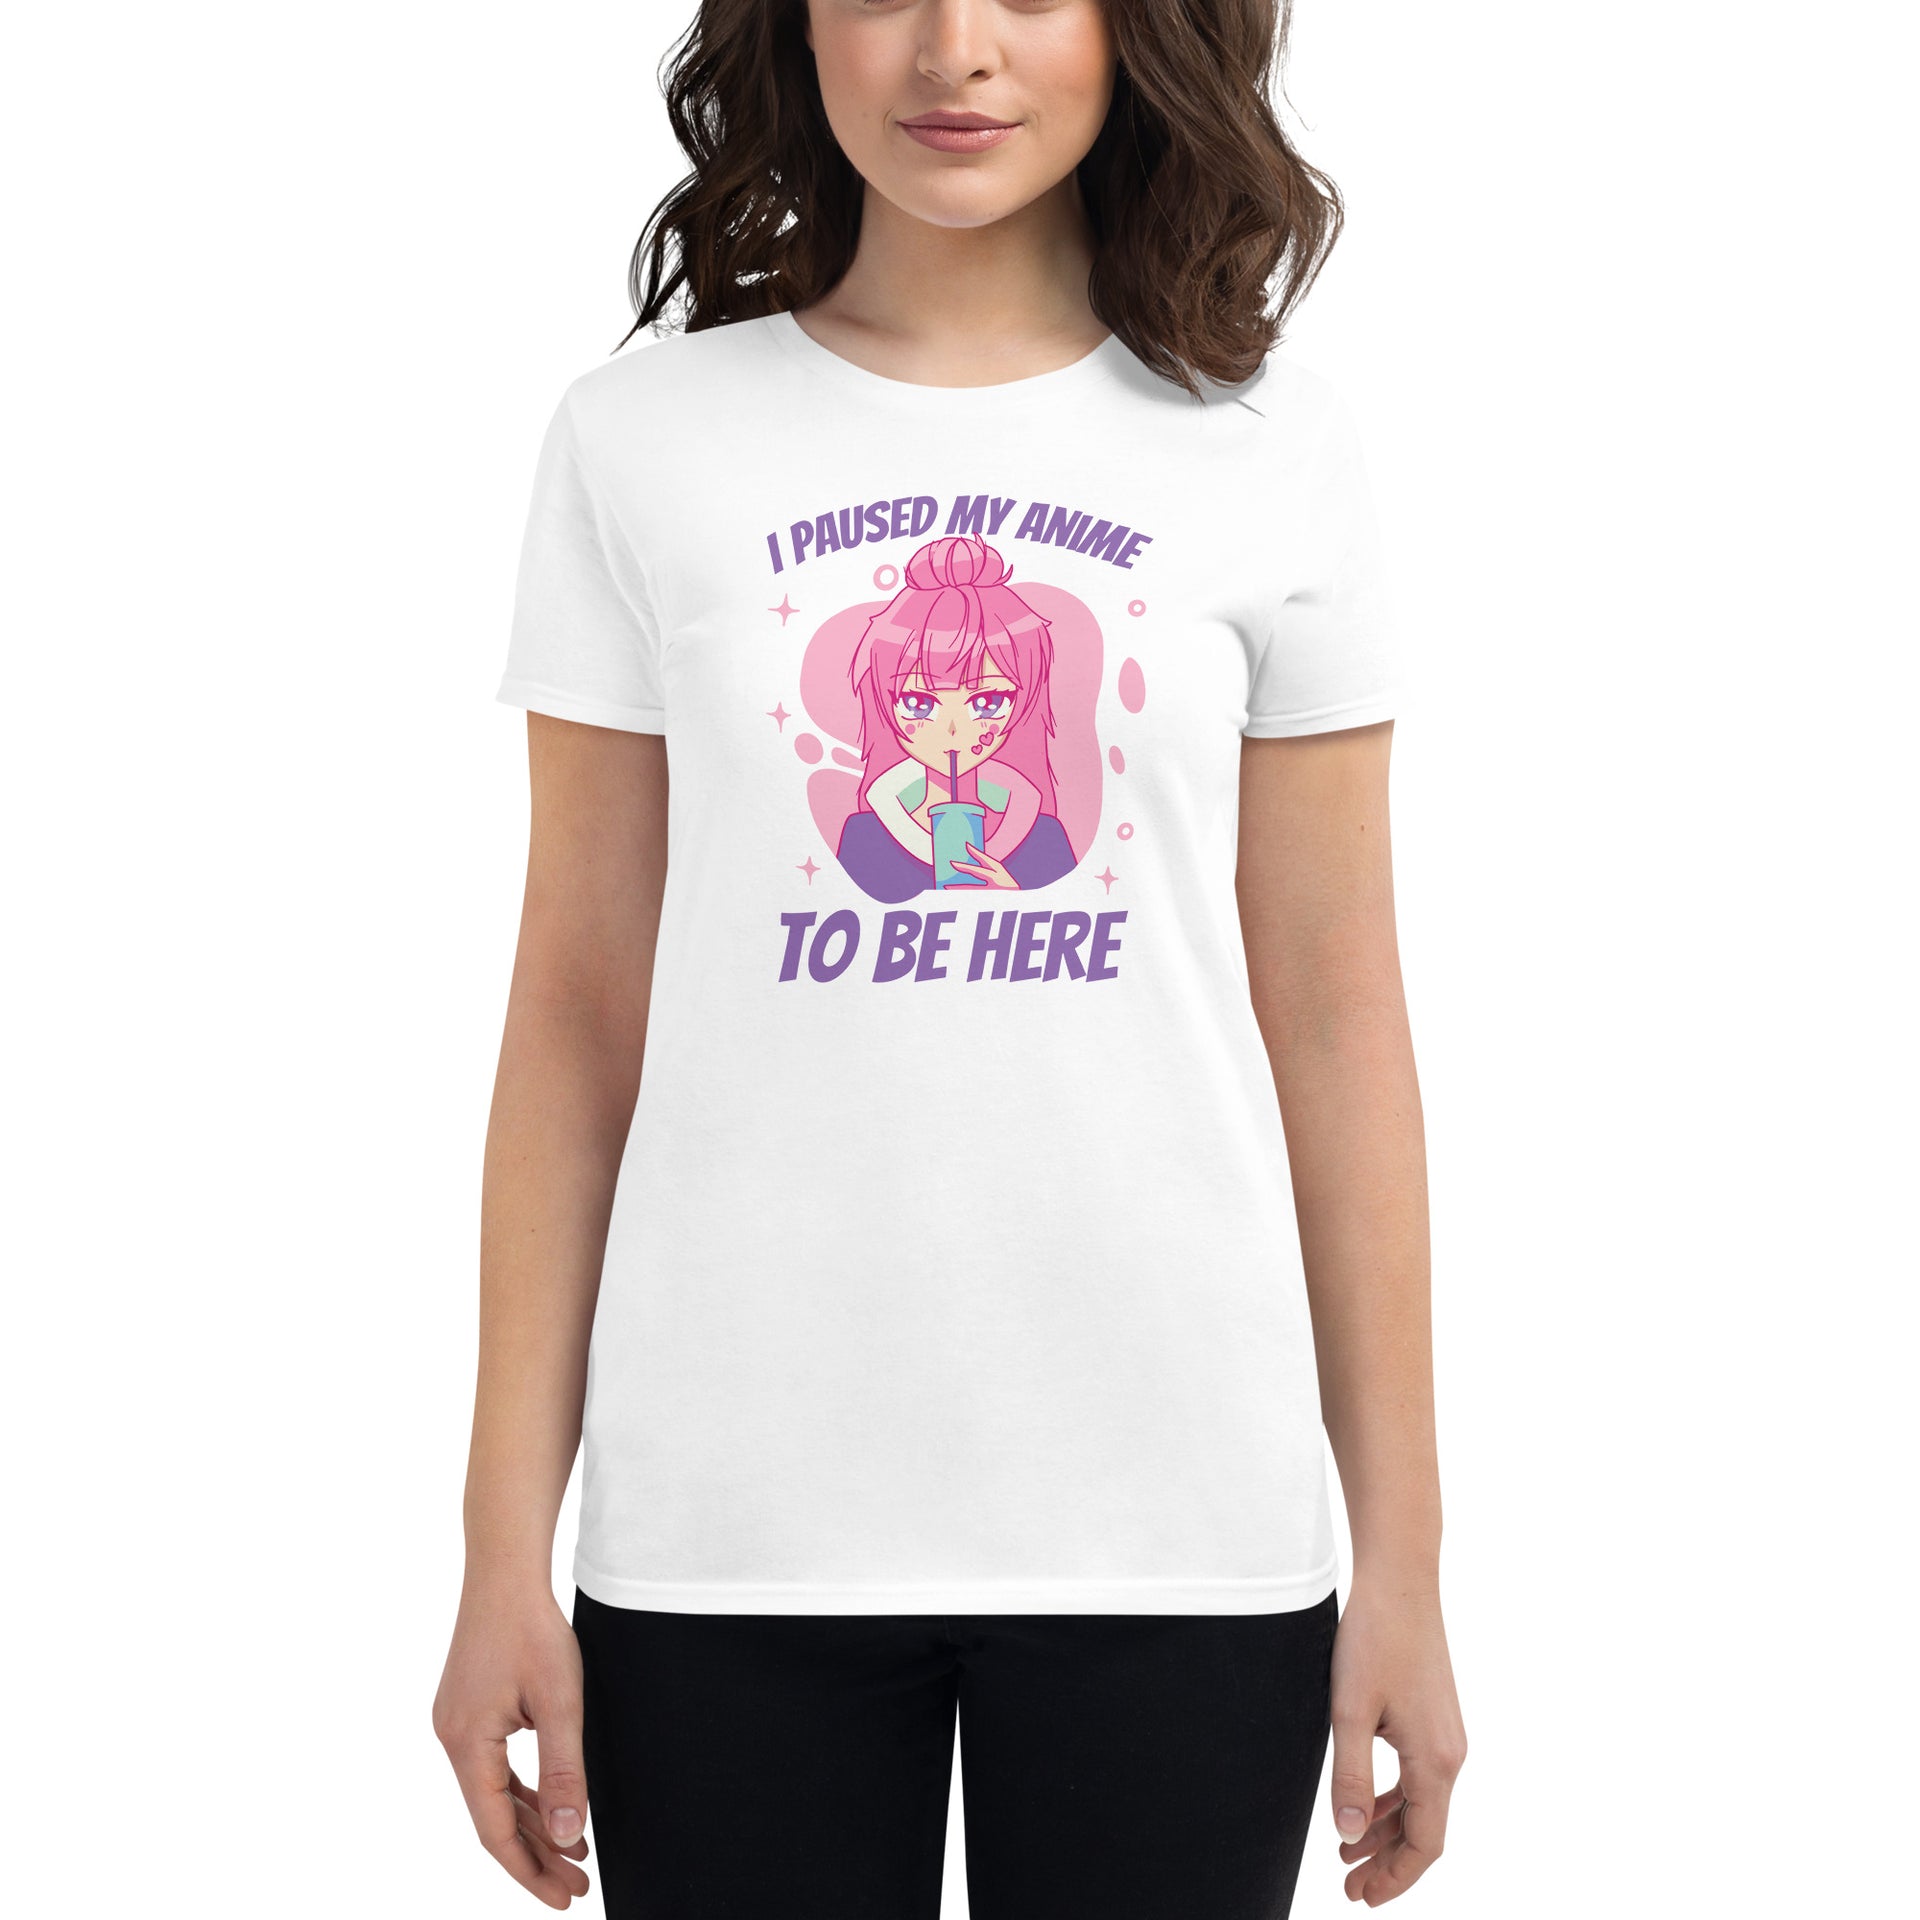 I Paused My Anime To Be Here Women's T-Shirt